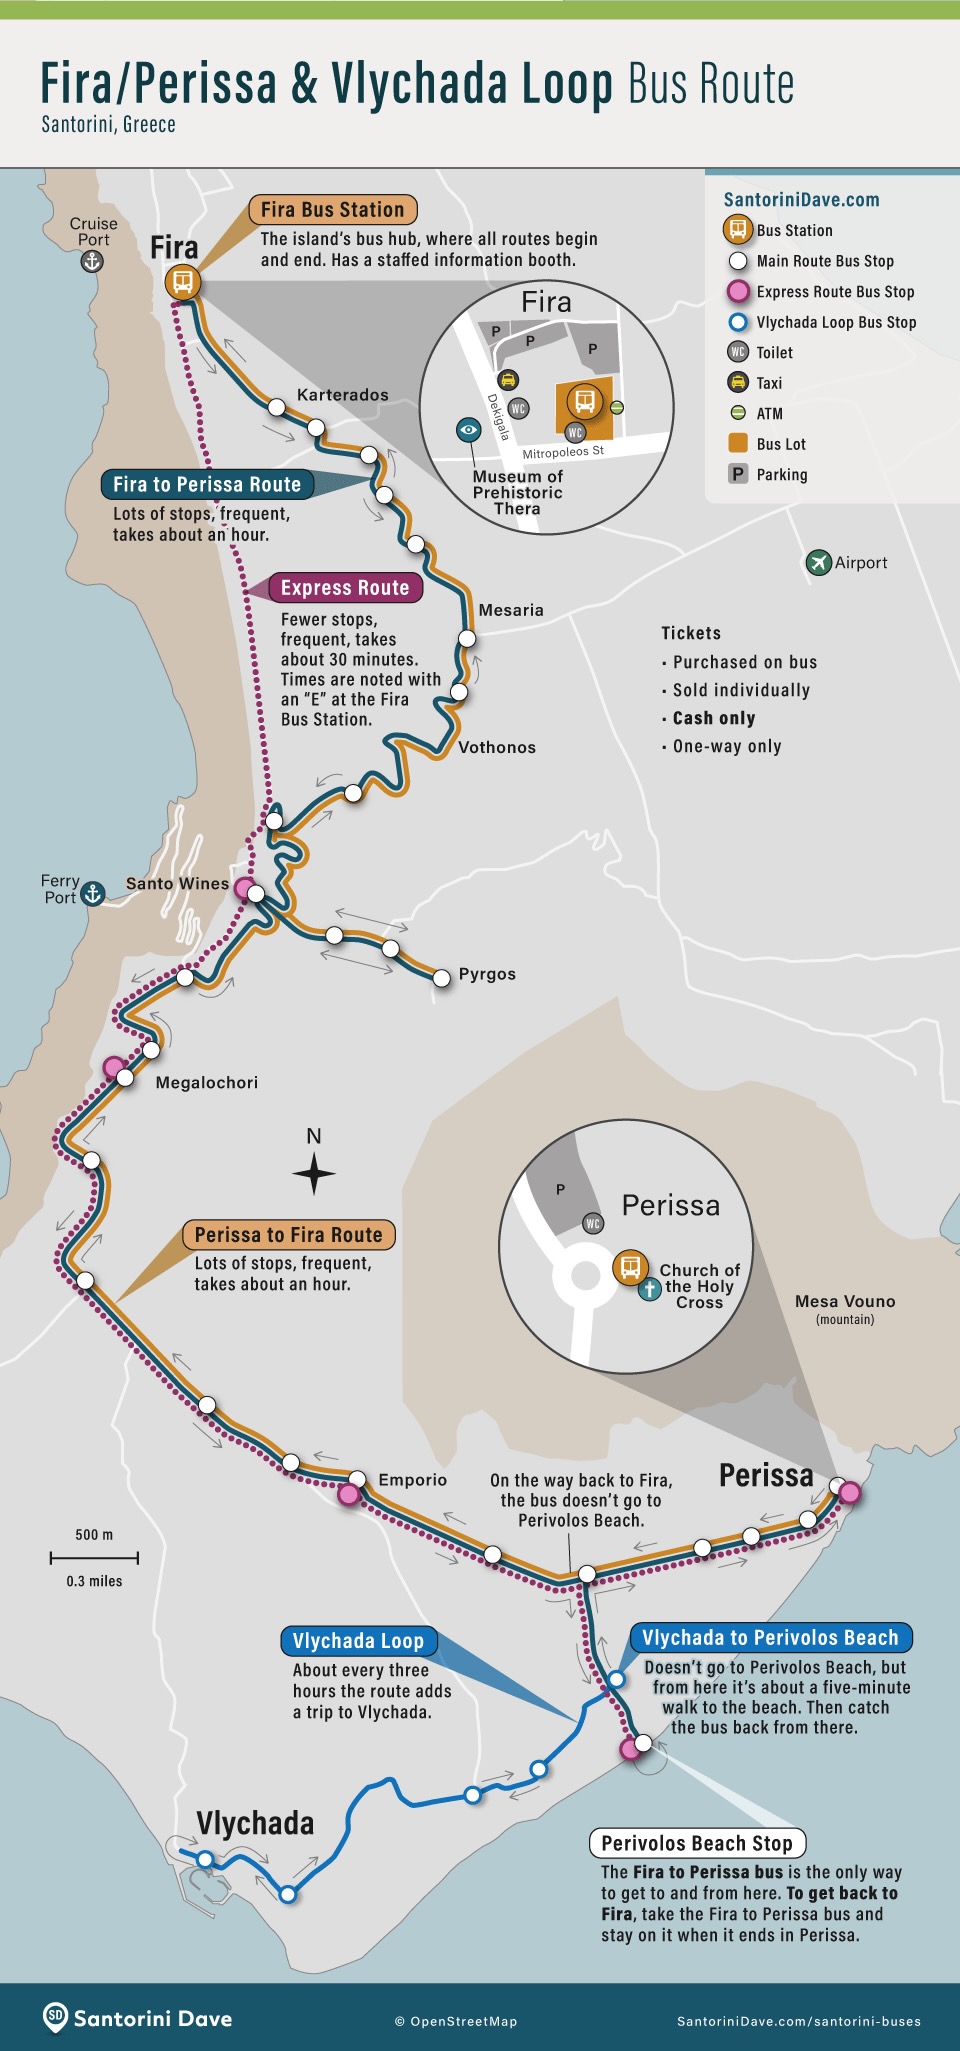 Map showing the Fira to Perissa route with the Perissa Express and Vlychada Loop